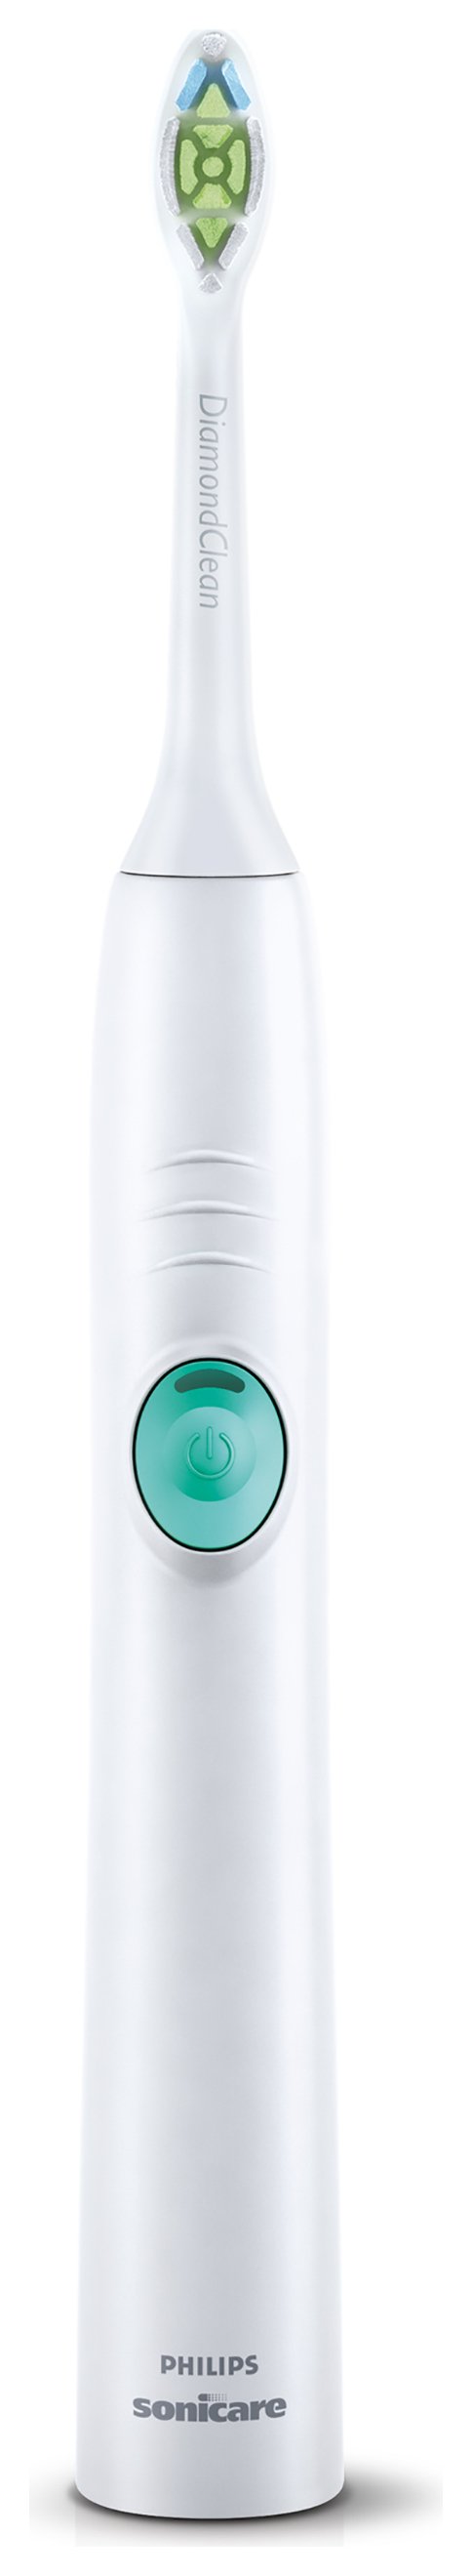 Philips HX6511/43 Sonicare EasyClean Electric Toothbrush